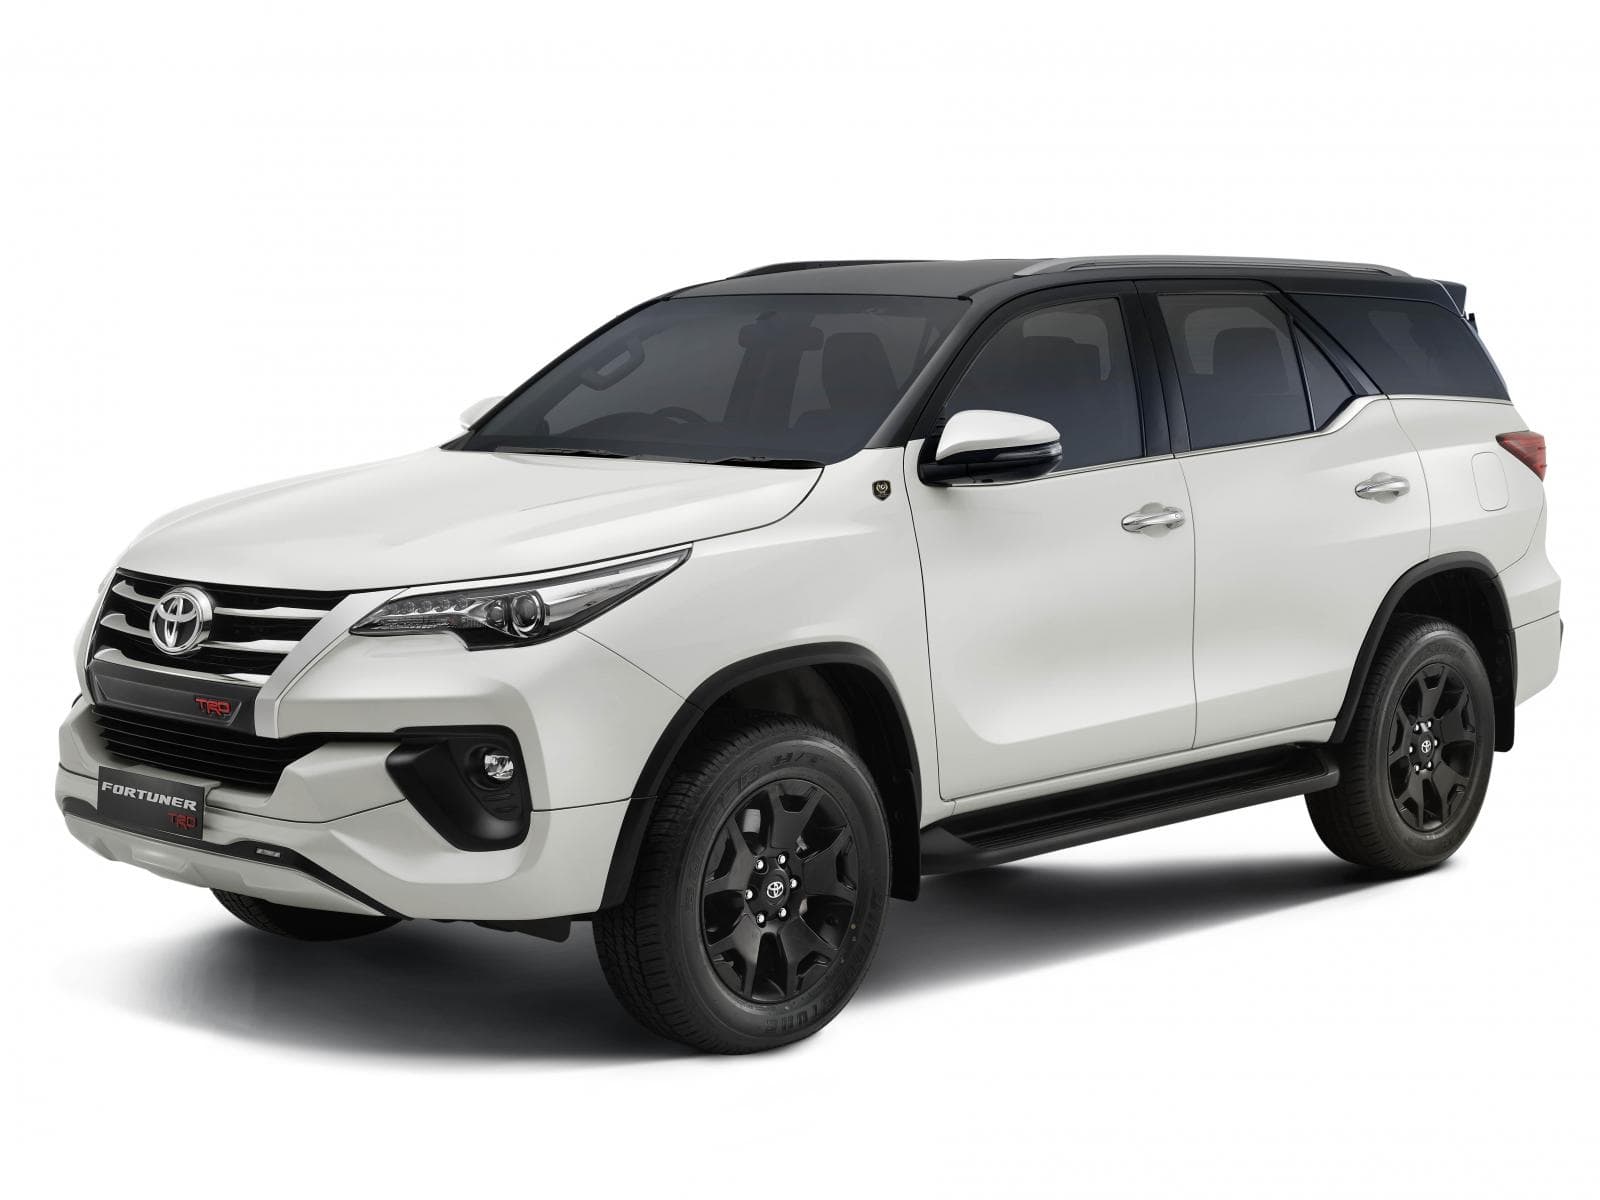 Toyota Fortuner wallpapers download 1600x1200